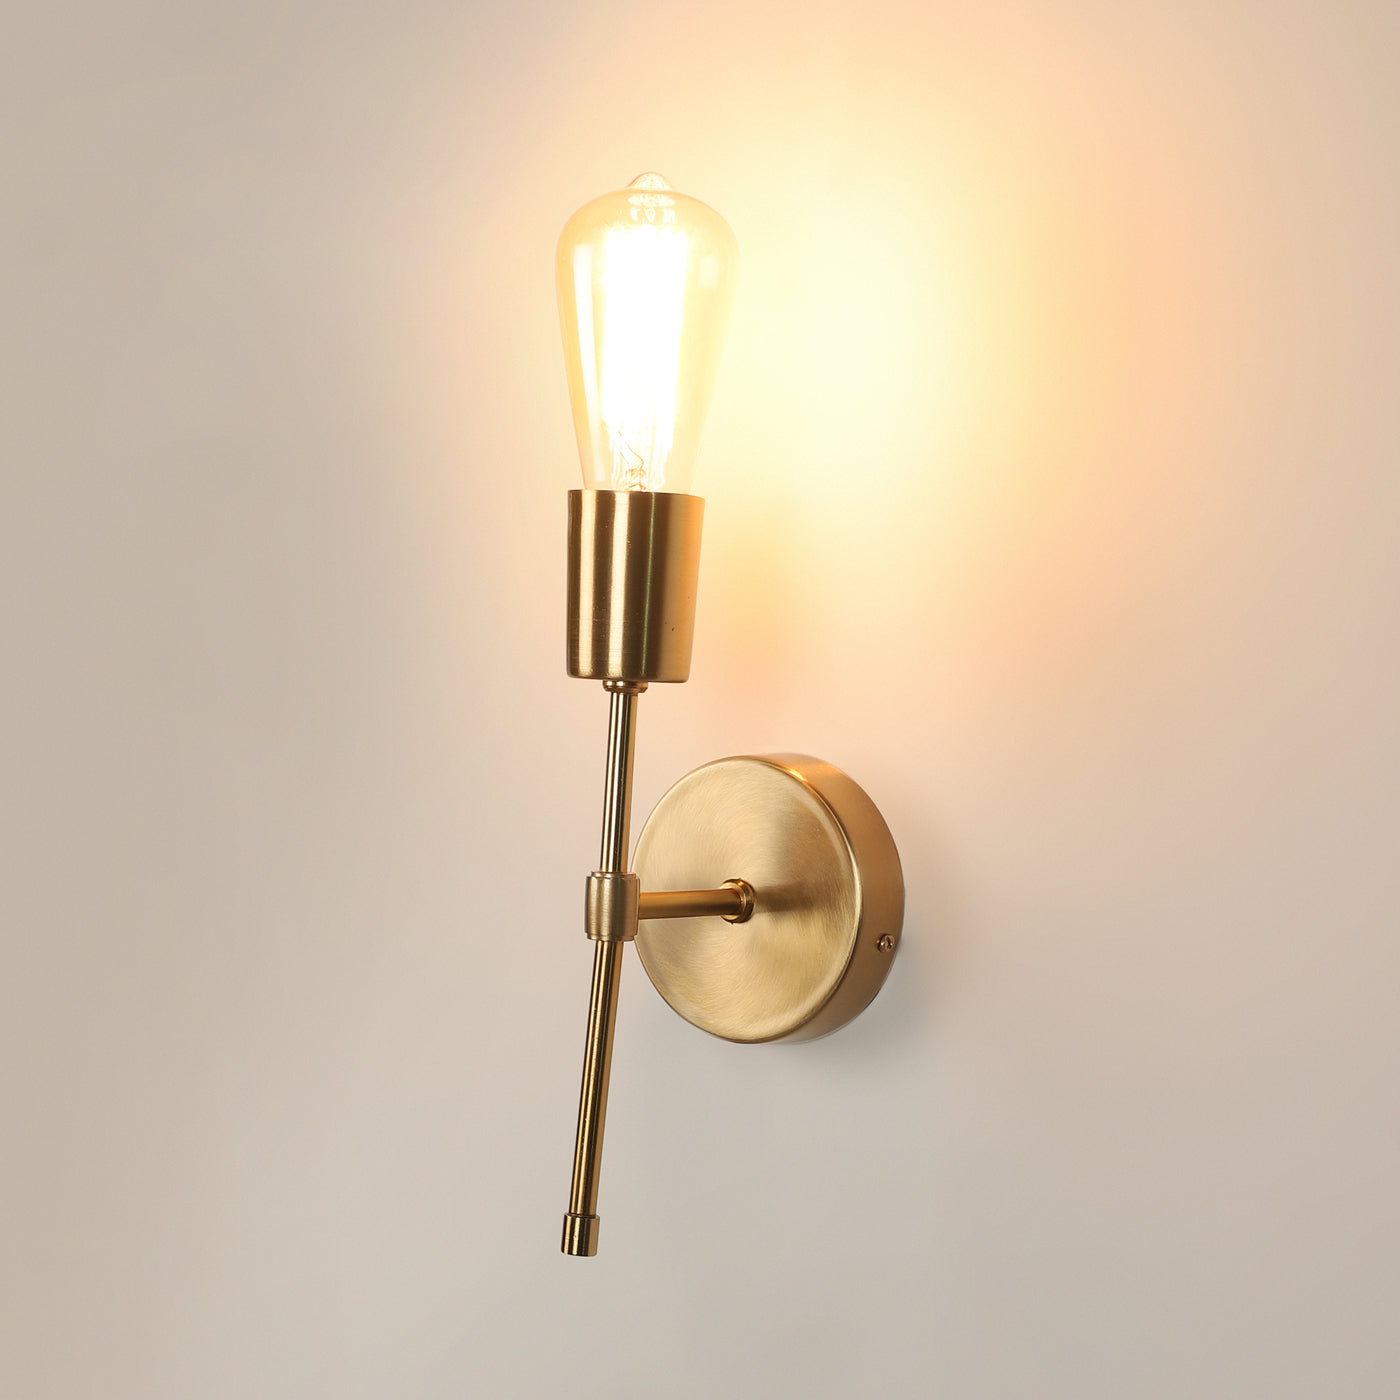 Salcia Gold Single Wall light in Pewter Finish